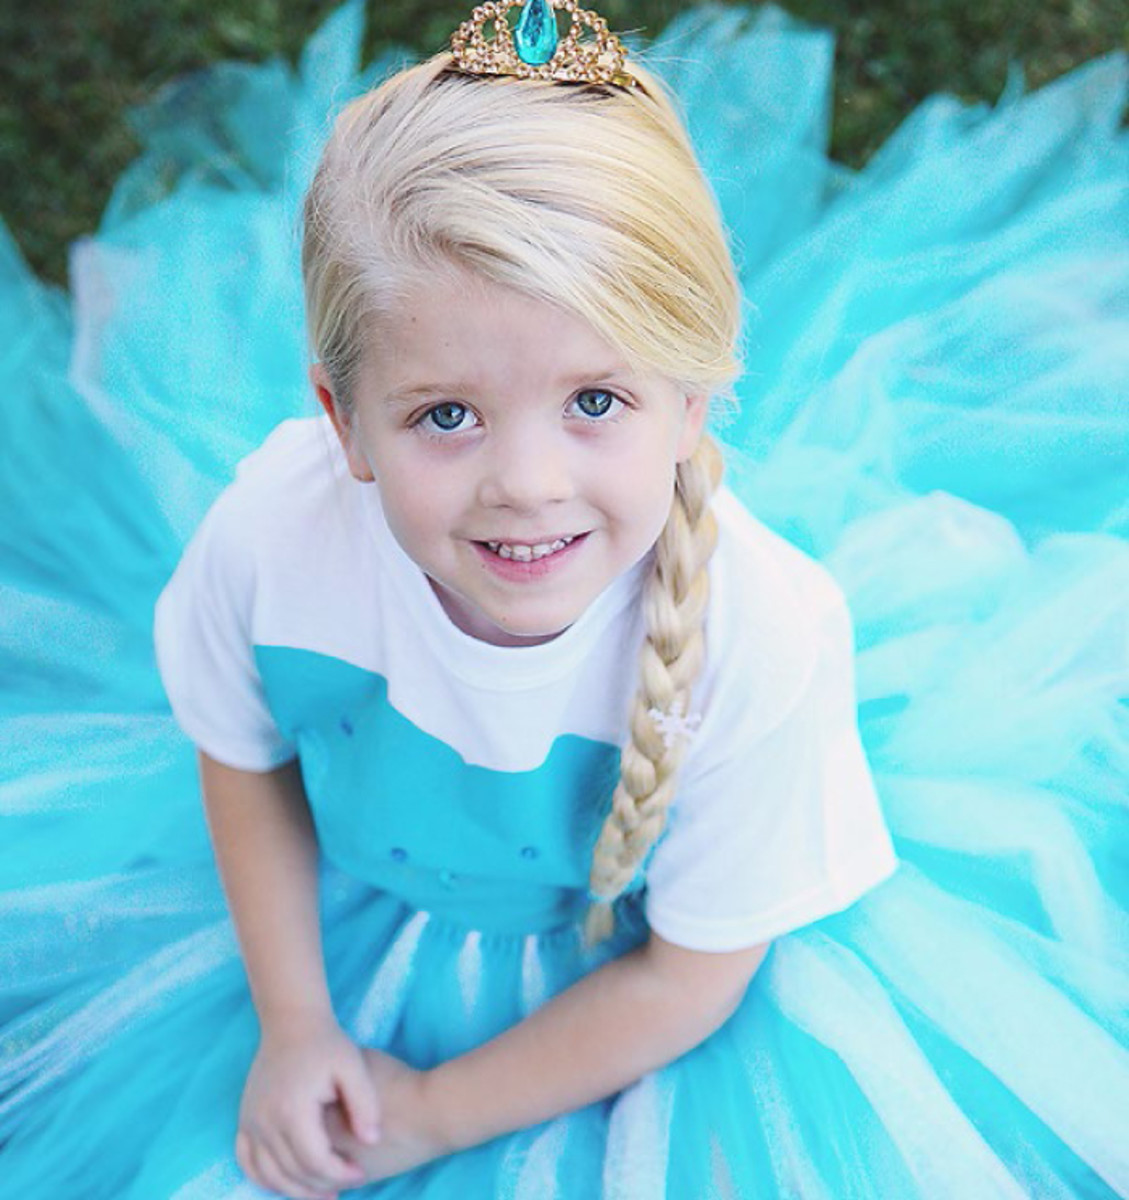 How to Make Your Own Elsa Costume